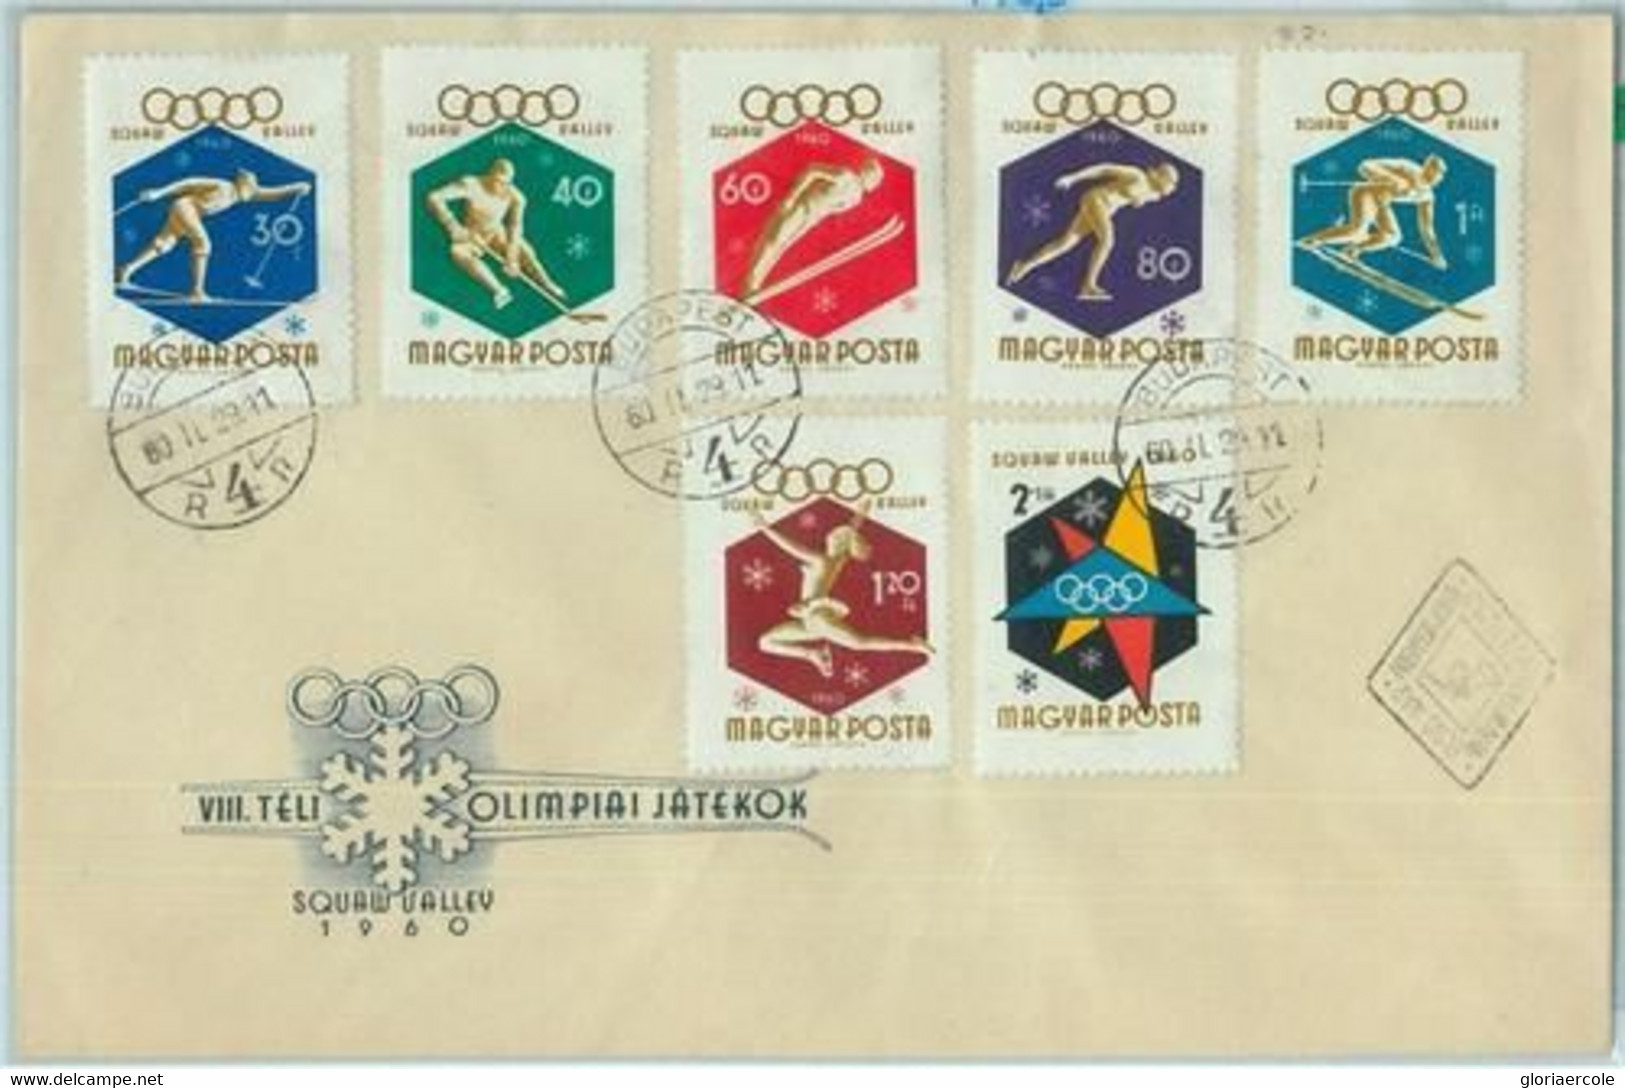 68000 - HUNGARY - POSTAL HISTORY -   Squaw Valley 1960 Winter Olympic Games FDC - Winter 1960: Squaw Valley